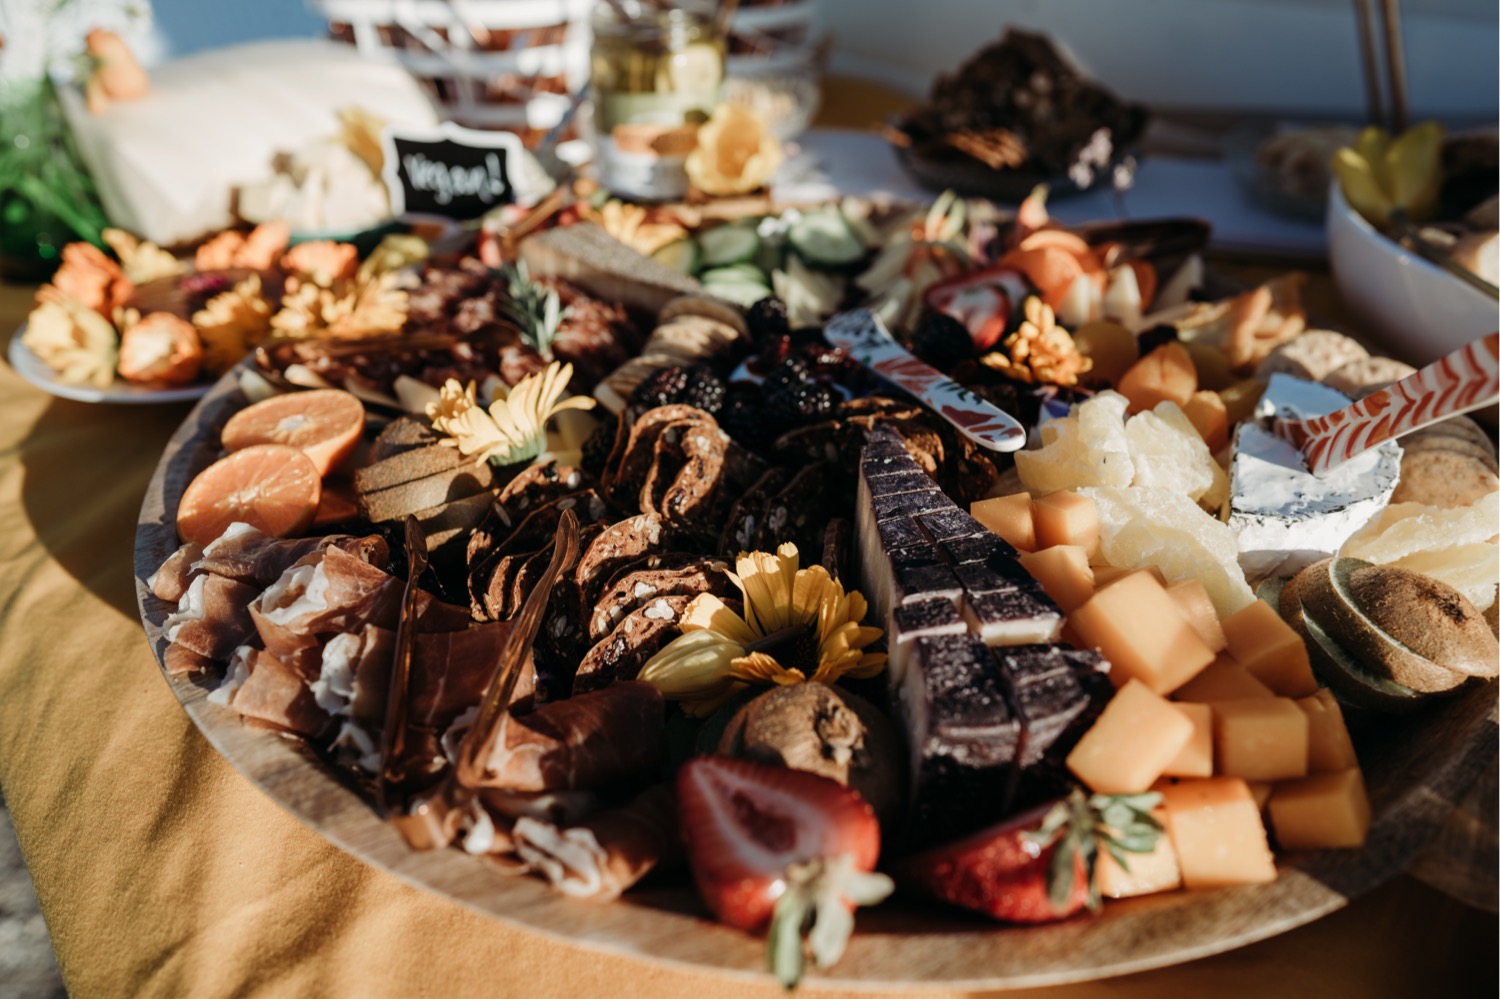 Plate filled with a variety of meat, cheese, and fruit. Liz Koston Photography.